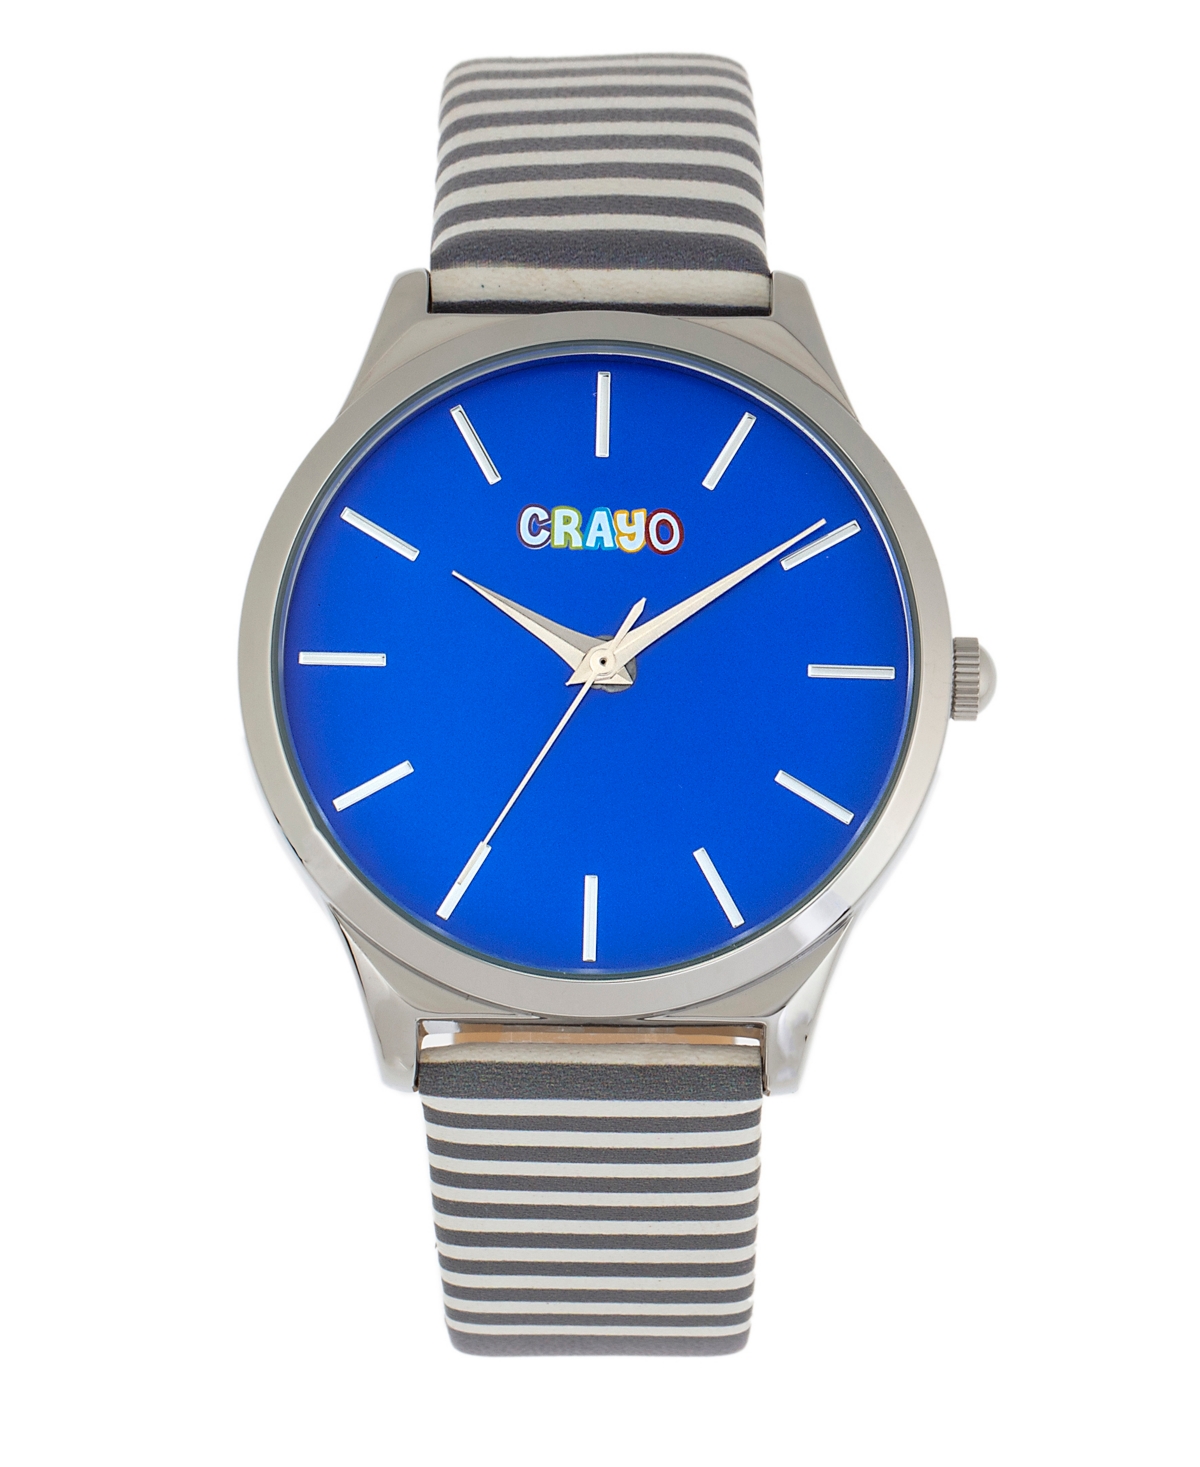 Crayo Aboard Unisex Red and White or Gray or Green or Purple or Black or Orange Leatherette Strap Watch, 40mm